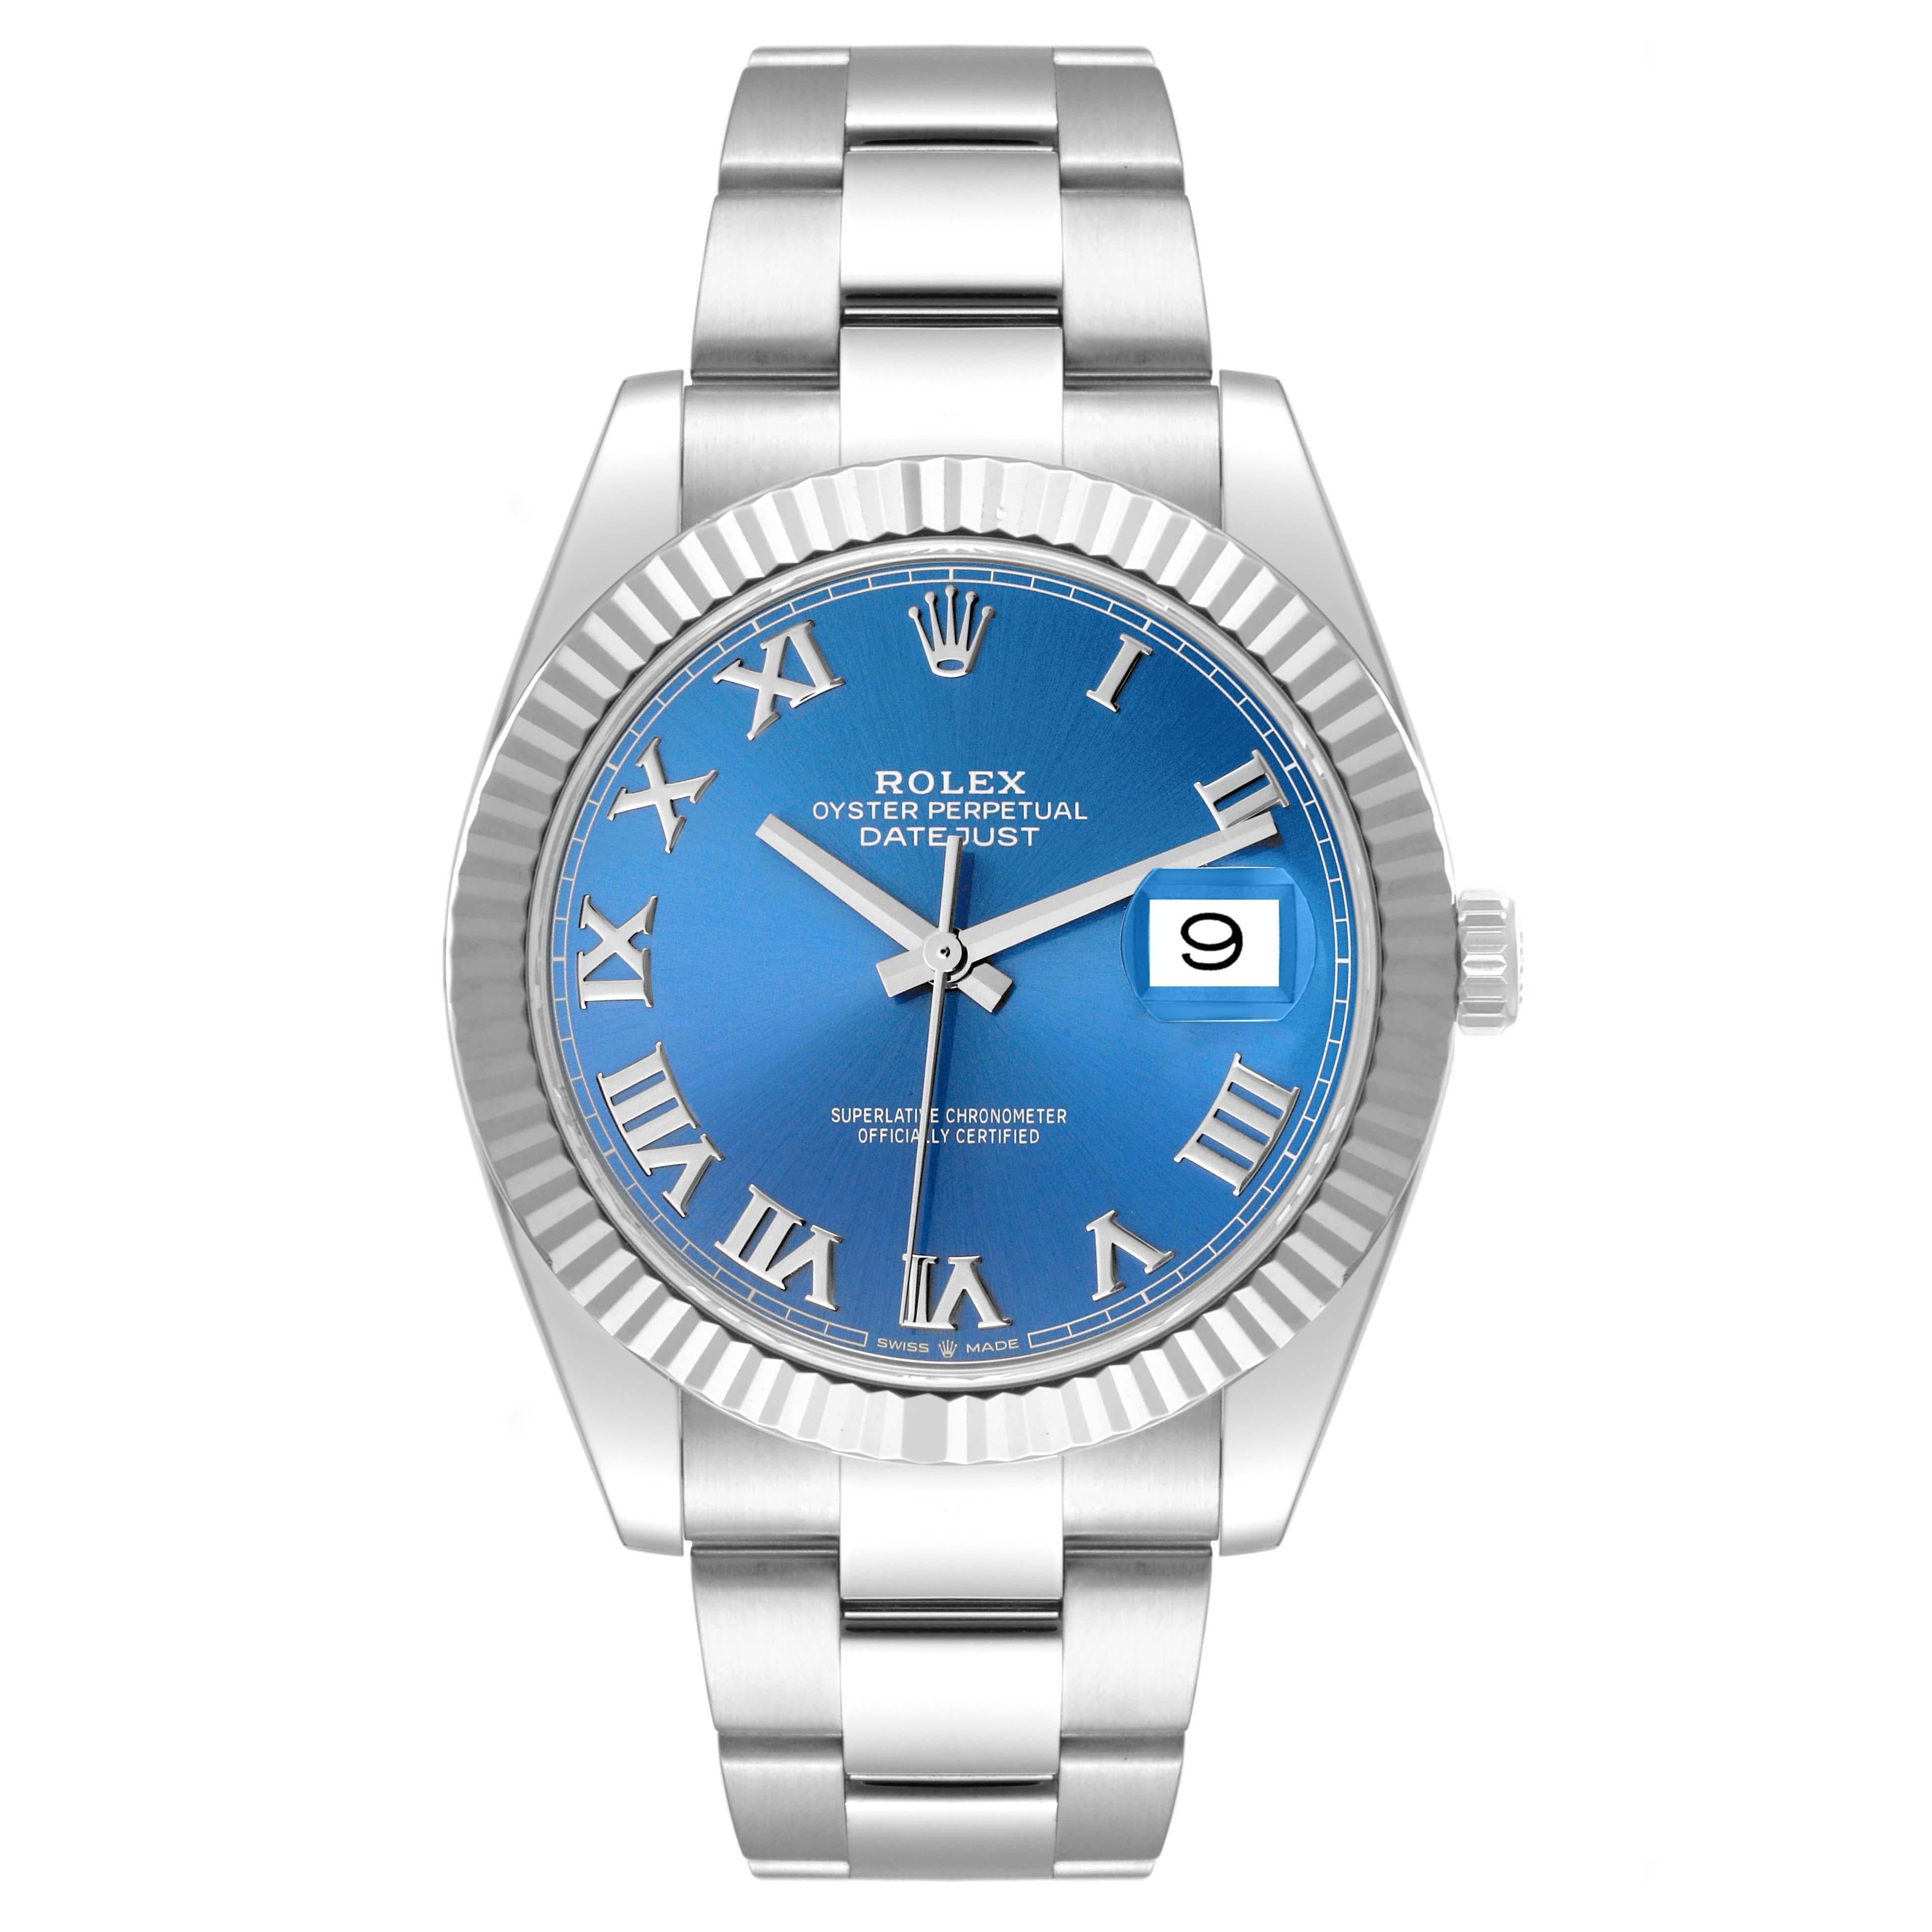 Rolex Datejust 41 Steel White Gold Blue Dial Mens Watch 126334 Box Card. Officially certified chronometer automatic self-winding movement. Stainless steel case 41 mm in diameter. Rolex logo on the crown. 18K white gold fluted bezel. Scratch